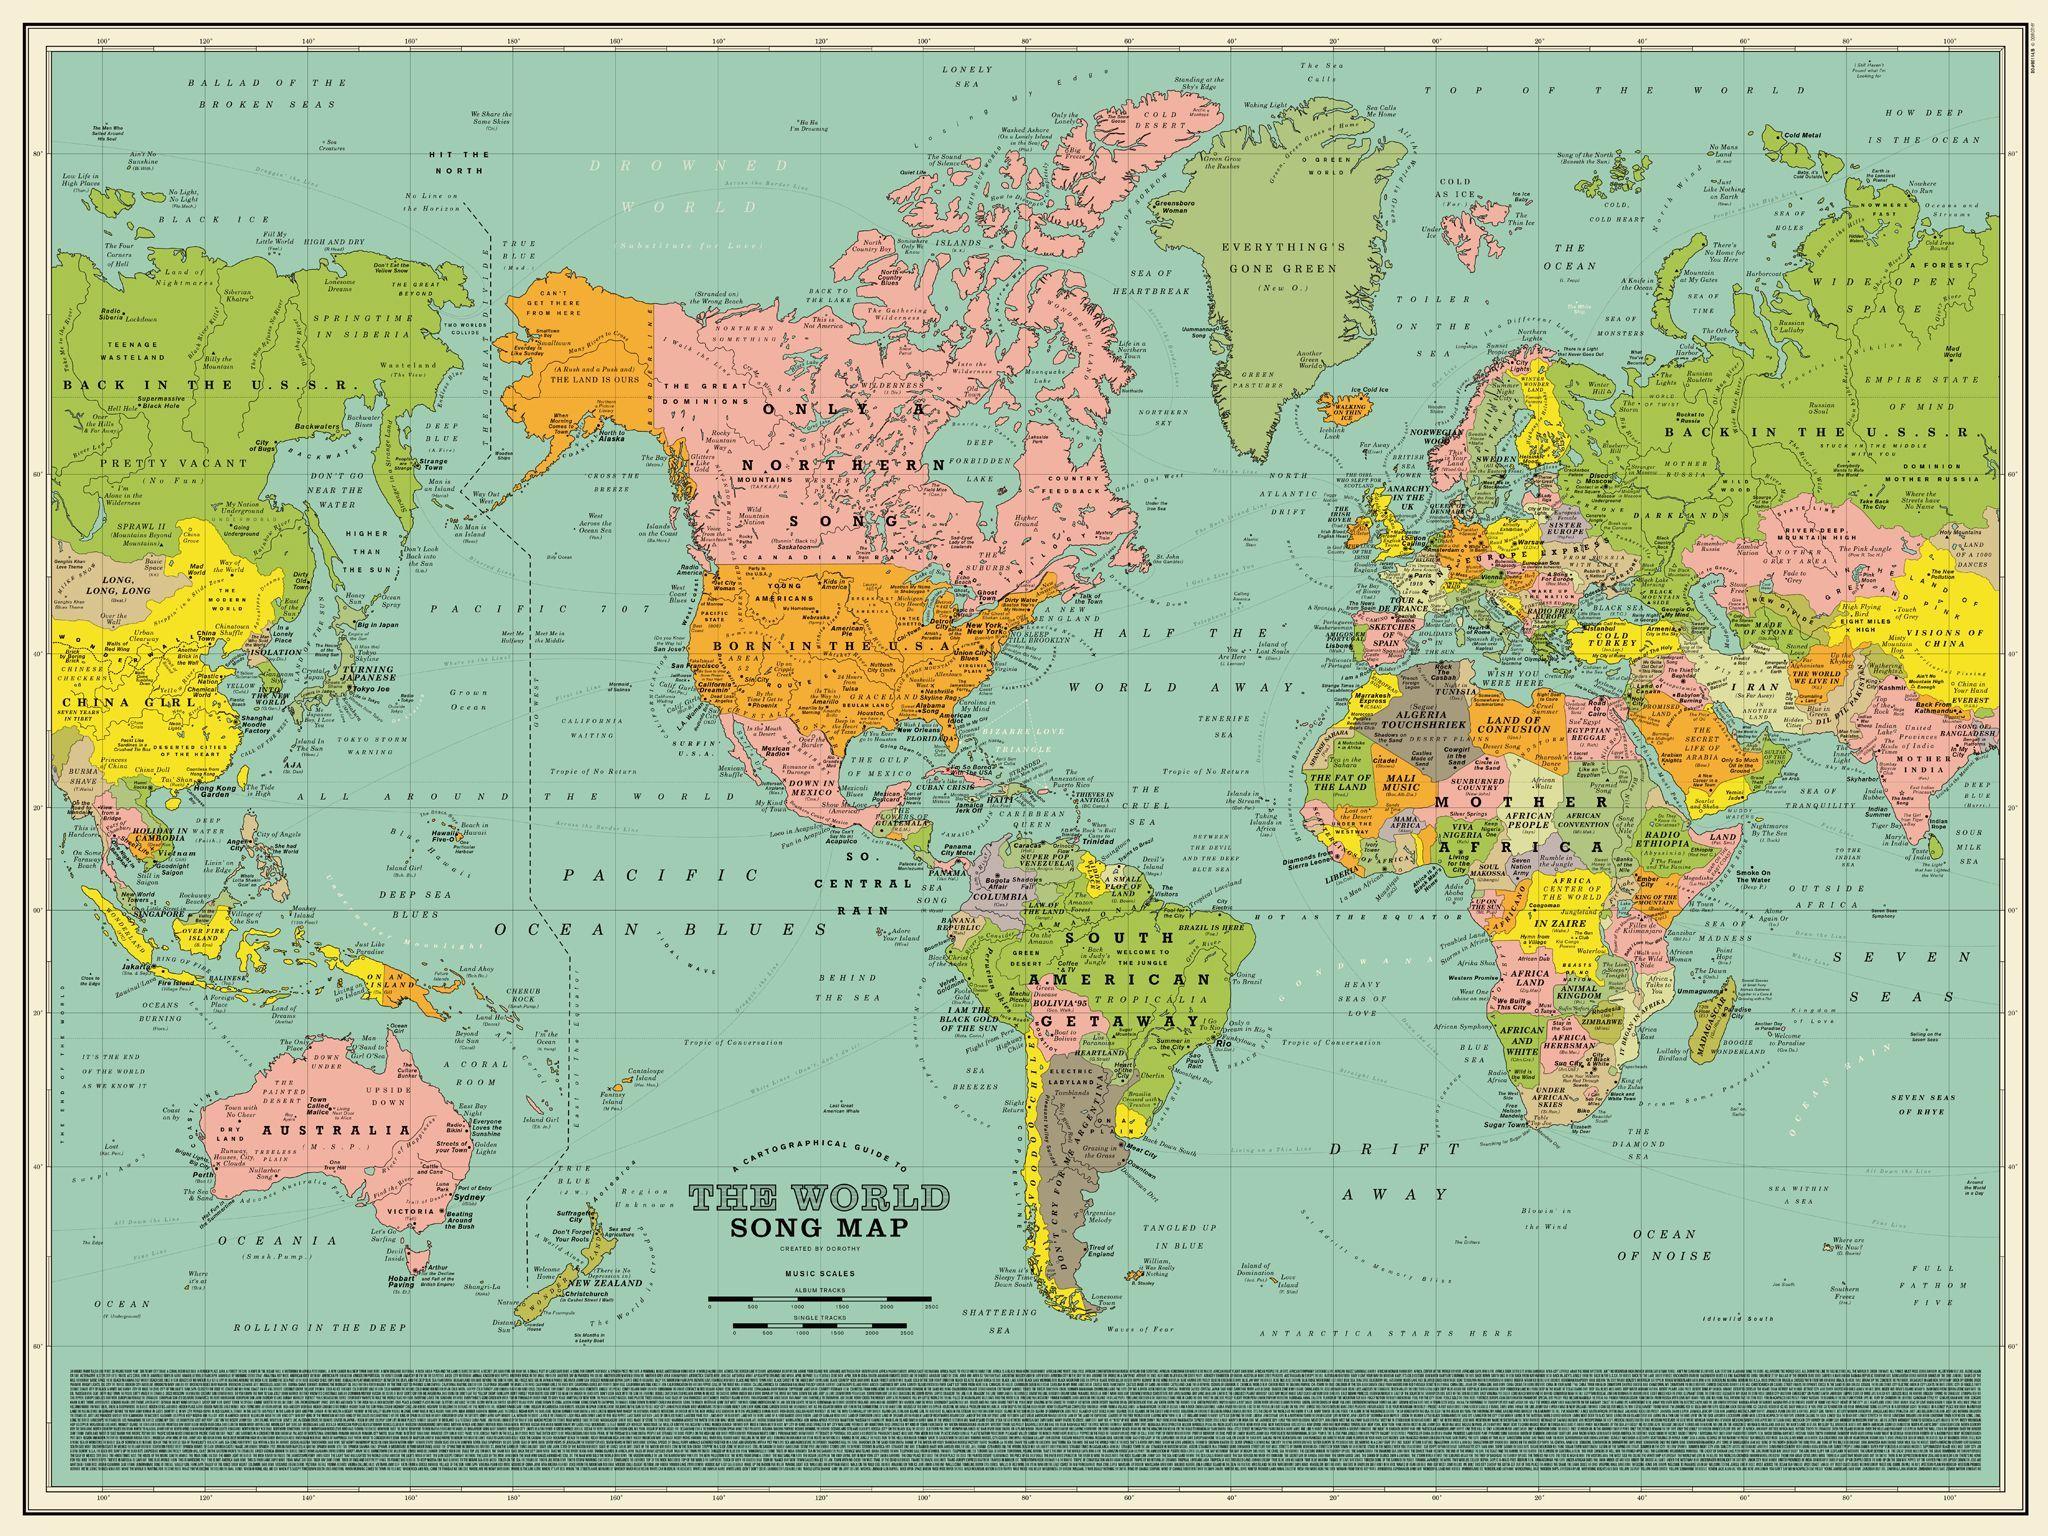 World Song Map, A Detailed Poster That Imagines the World Map Made